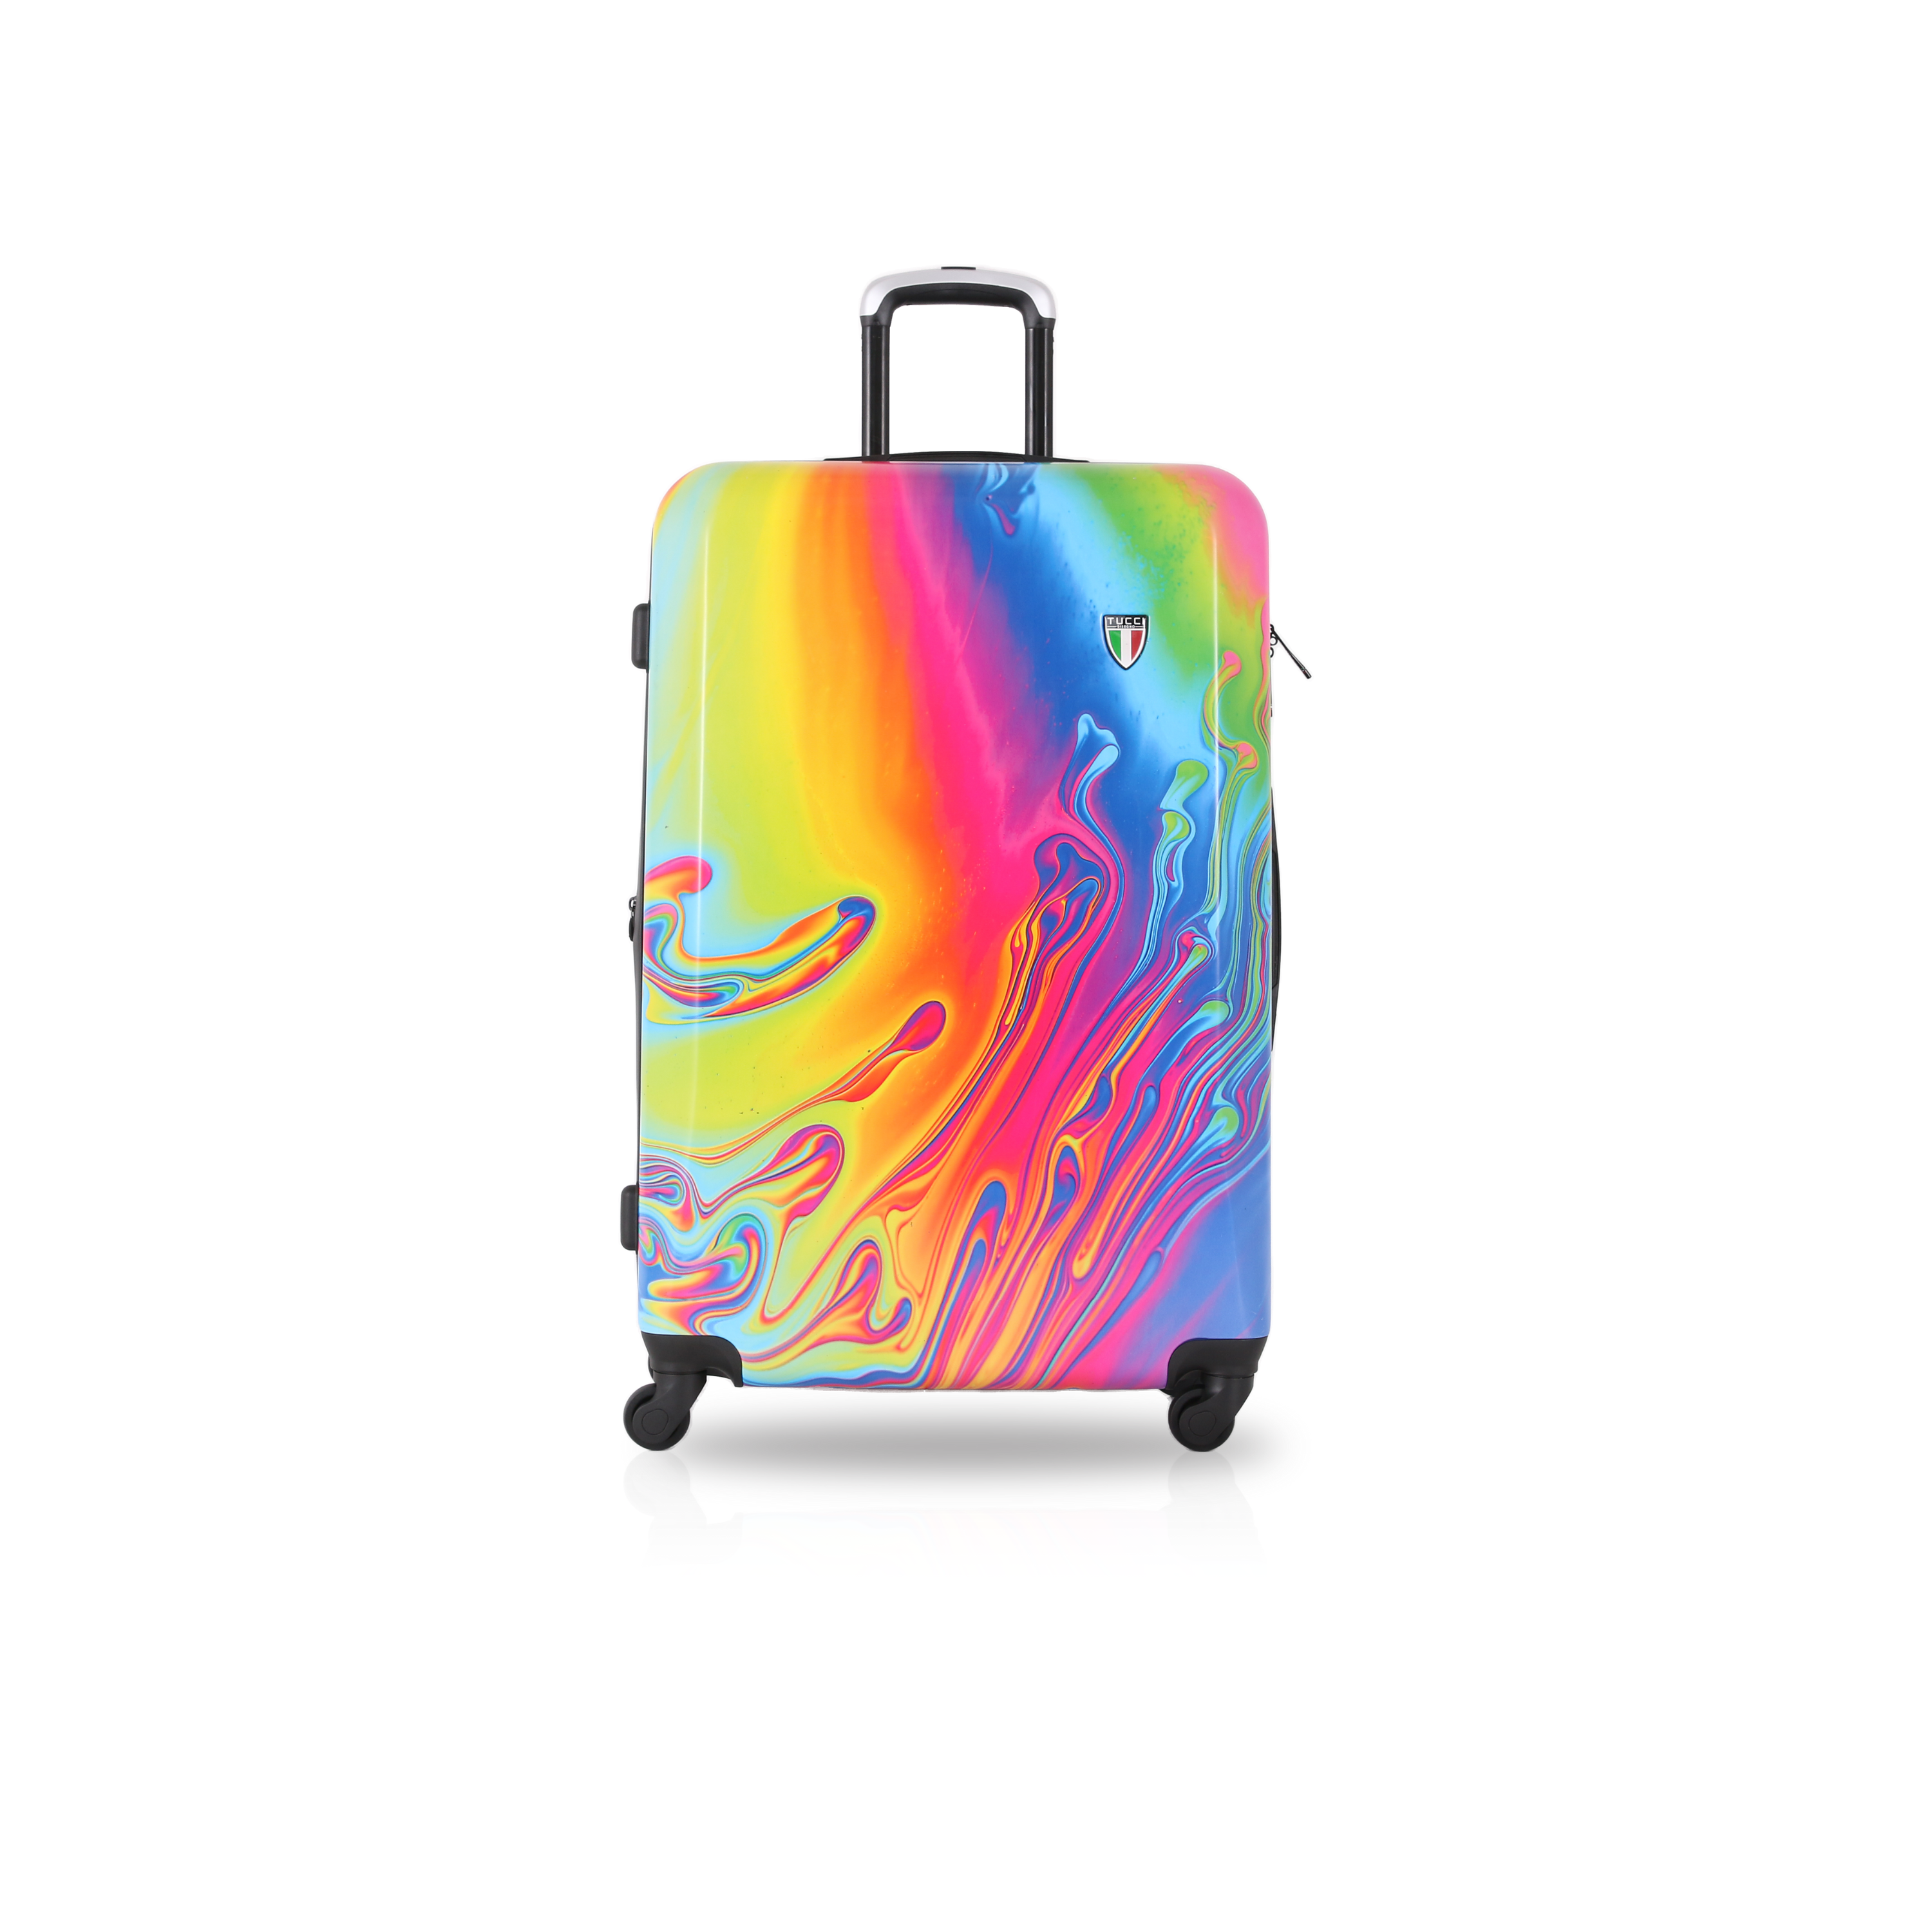 Suitcase art/personalized luggage - ART WILL TRAVEL